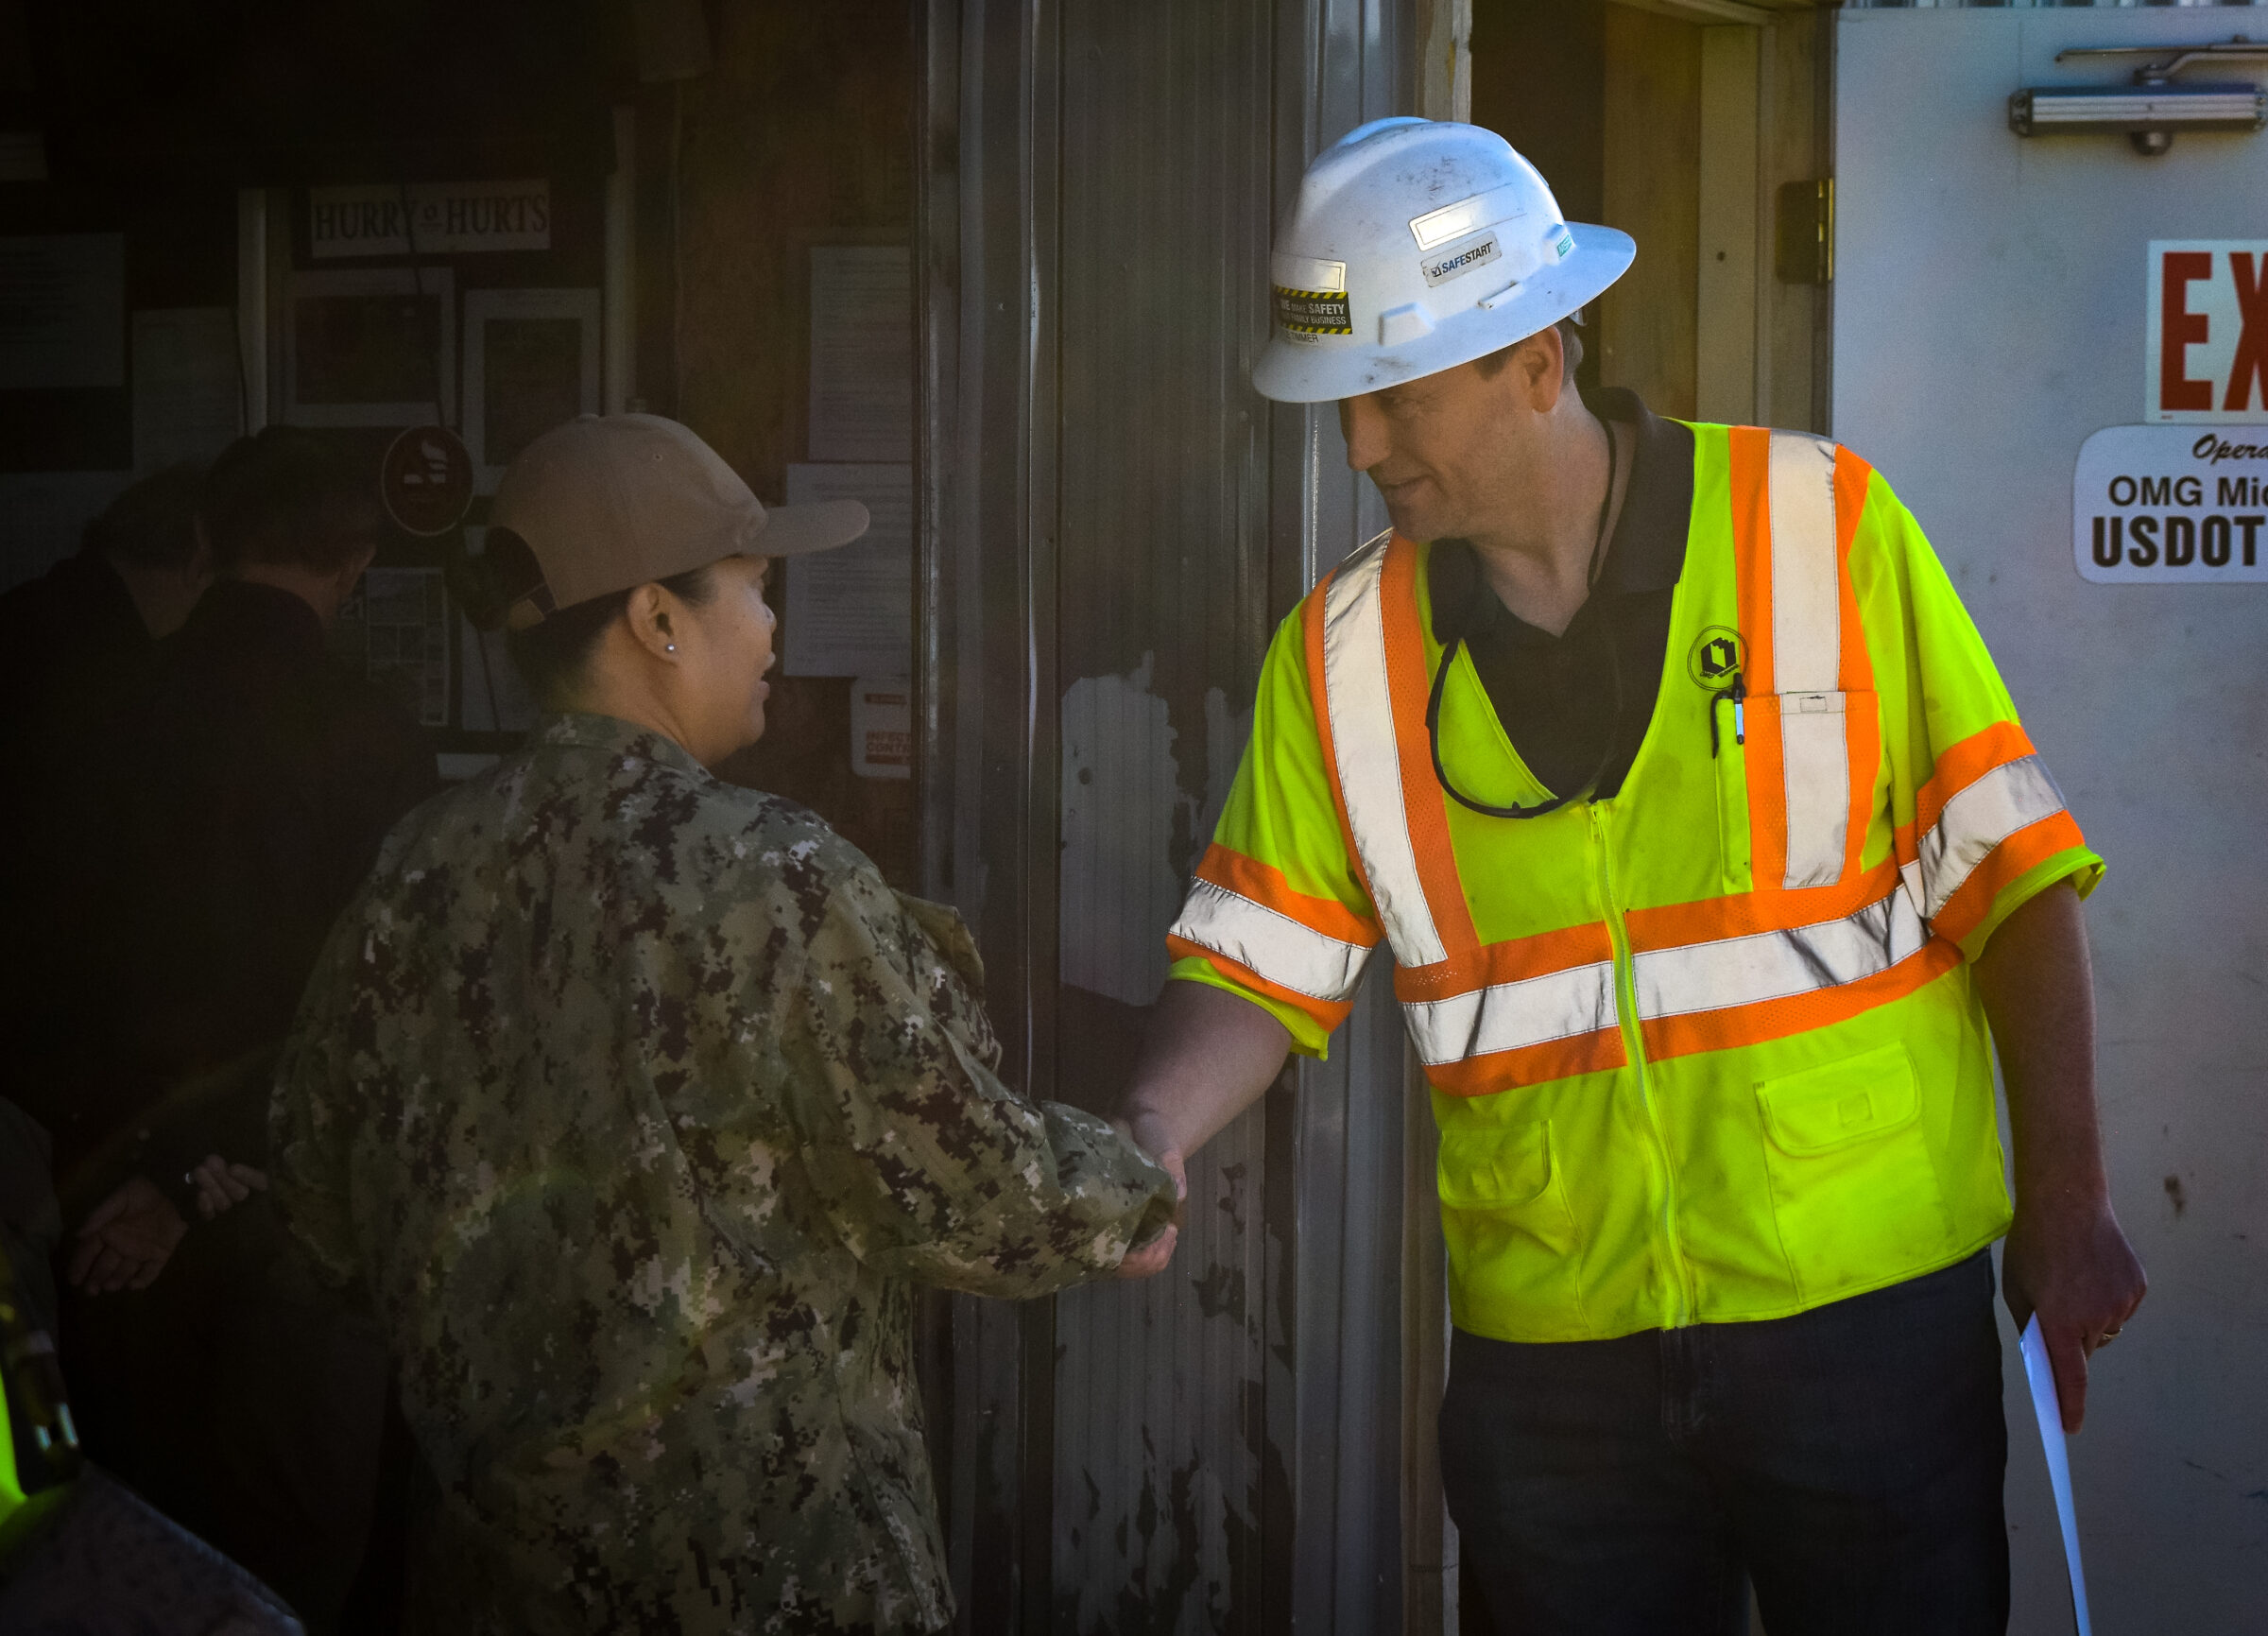 OMNI Engineering Asphalt and Construction values the skills our veteran employees bring to their job each day.